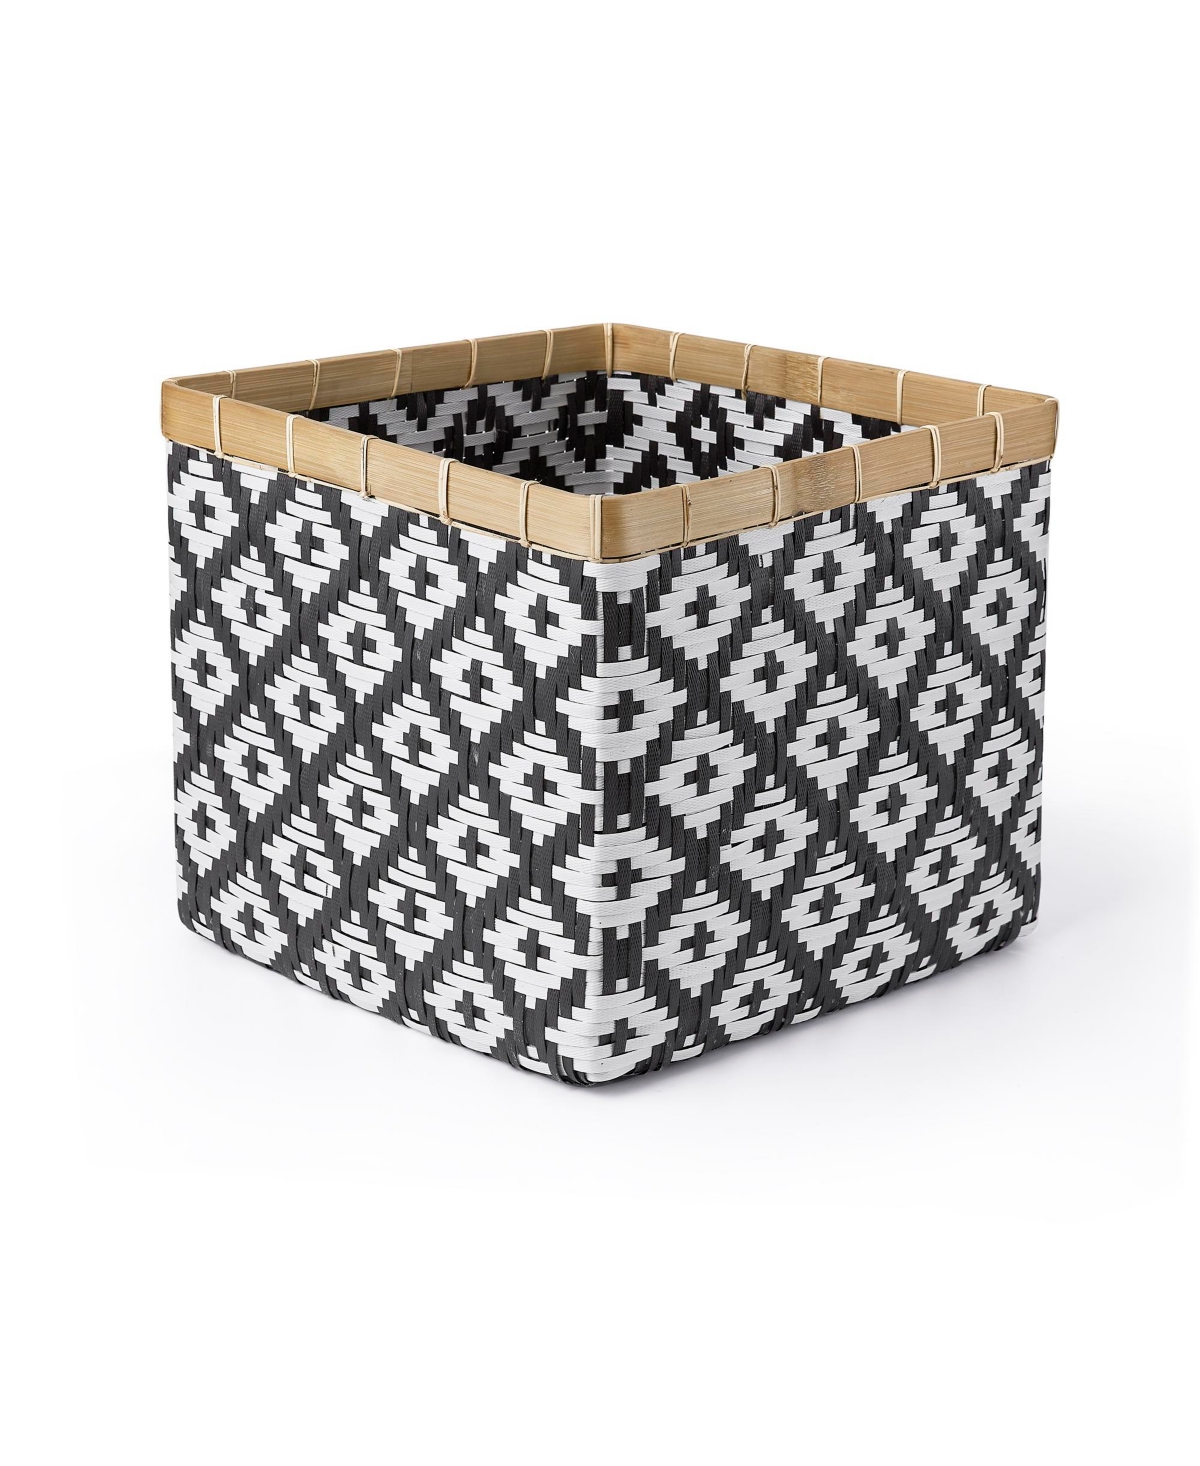 Shop Baum 3 Piece Square Bamboo Basket Set With No Handles, Natural Rim In Black And White